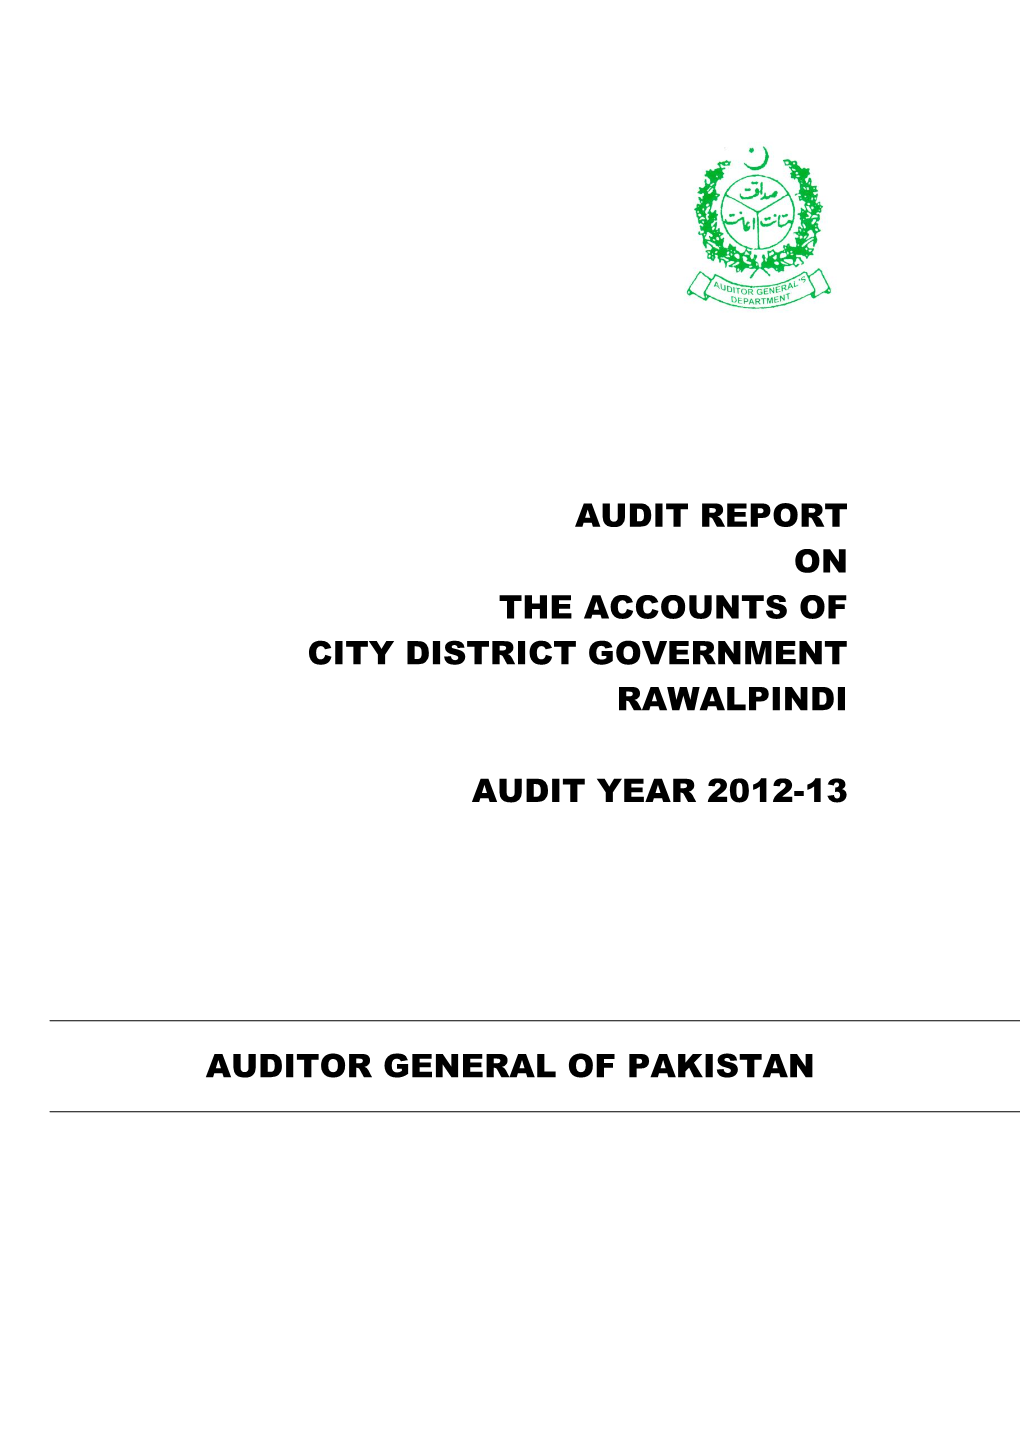 Audit Report on the Accounts of City District Government Rawalpindi Audit Year 2012-13 Auditor General of Pakistan